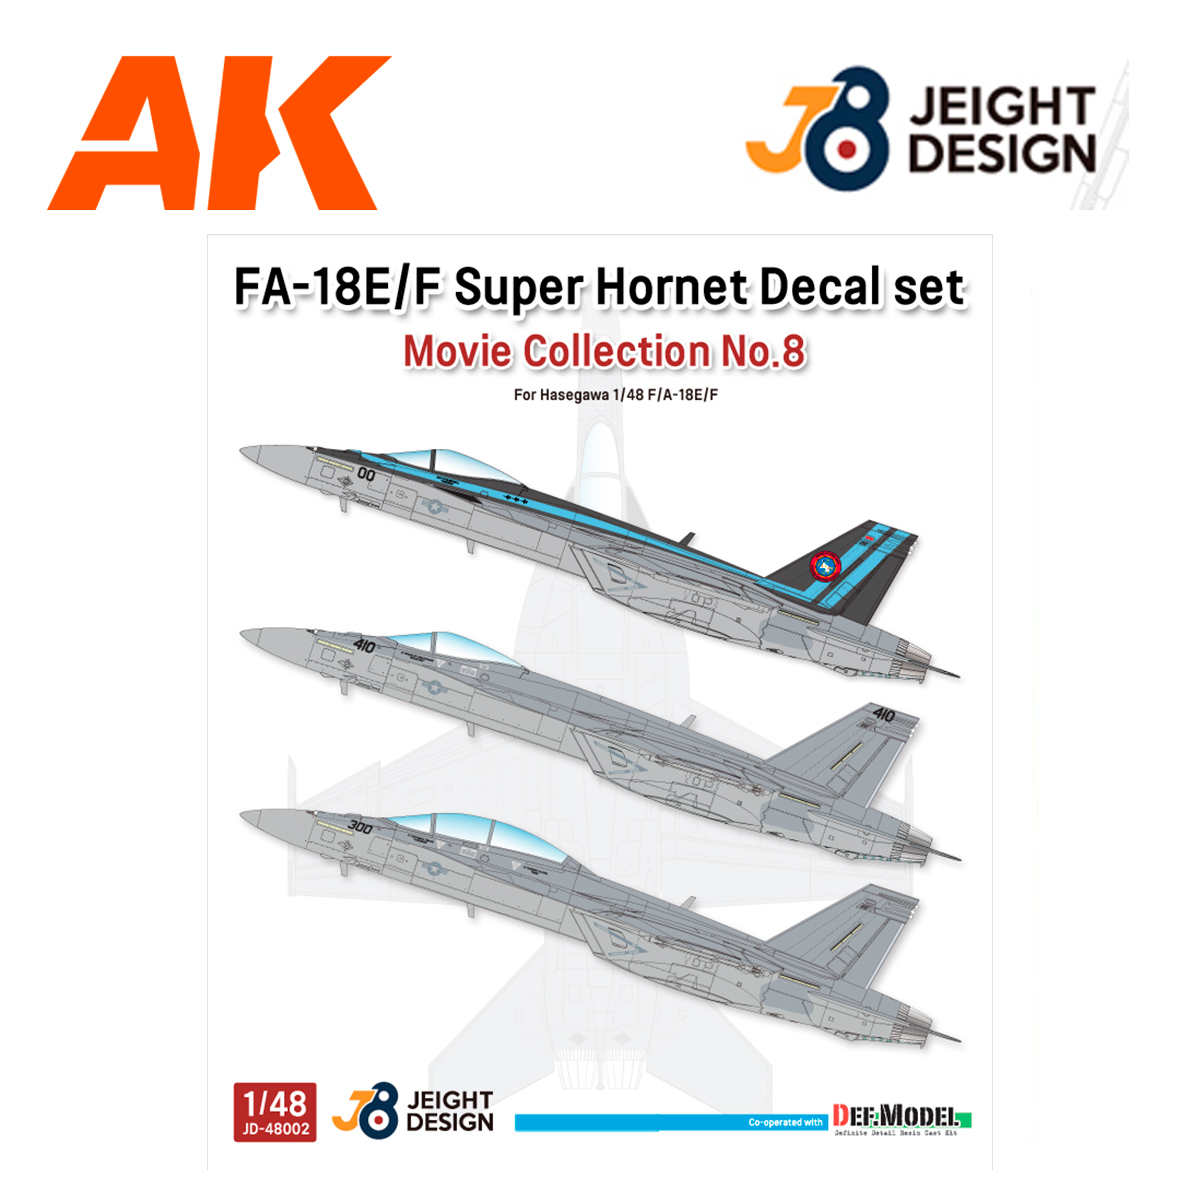 F/A-18E/F Super Hornet Decal set – Movie Collection No.8 for 1/48 Hasegawa kit